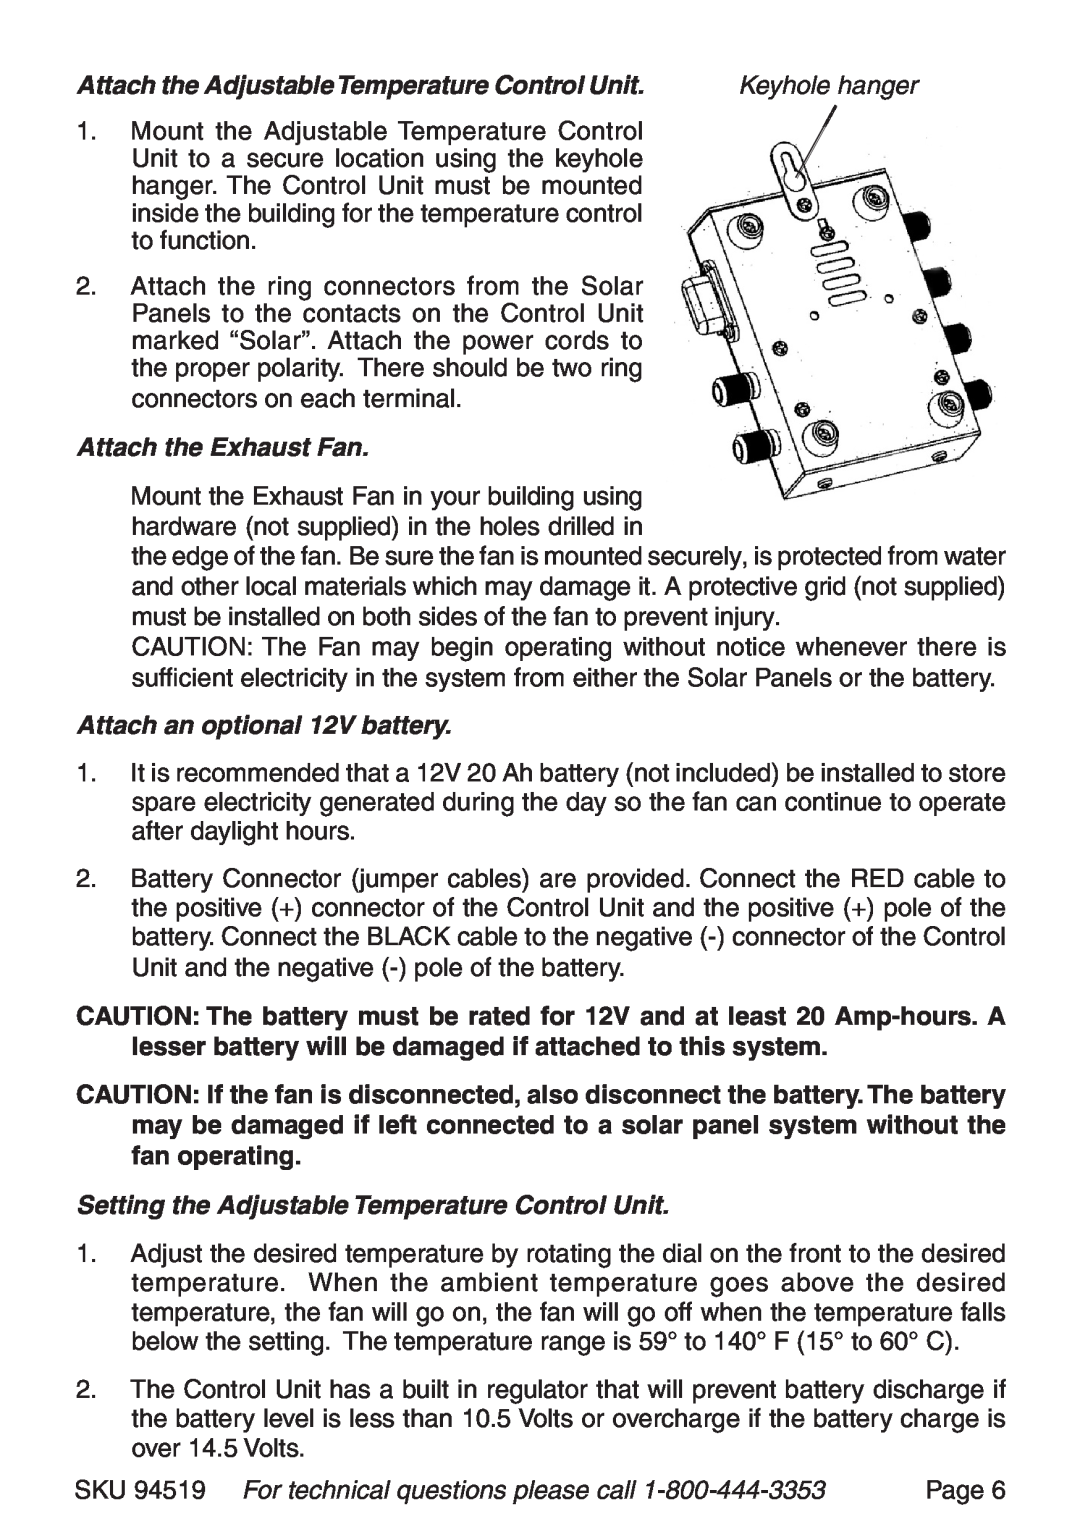 Harbor Freight Tools 94519 manual Attach the AdjustableTemperature Control Unit, Keyhole hanger, Attach the Exhaust Fan 